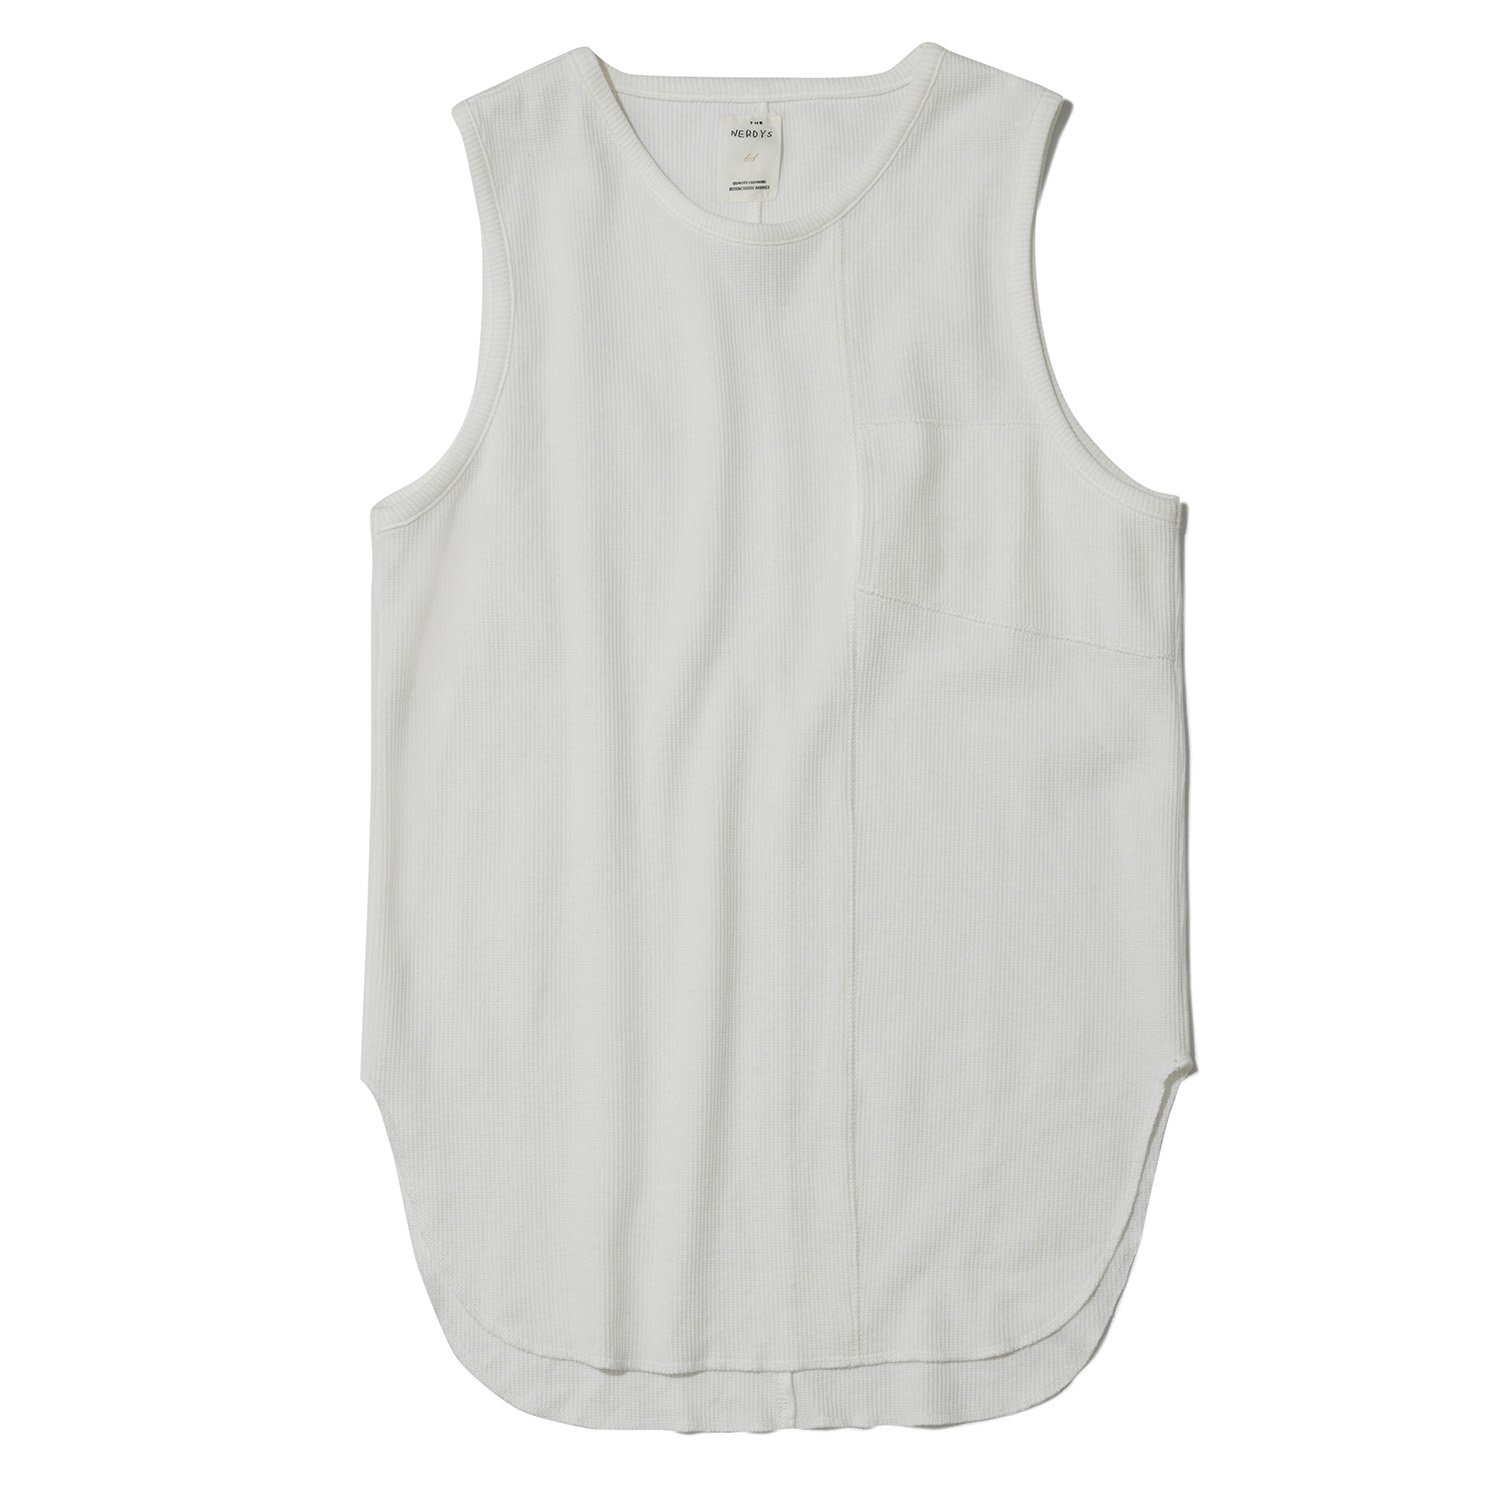 <img class='new_mark_img1' src='https://img.shop-pro.jp/img/new/icons8.gif' style='border:none;display:inline;margin:0px;padding:0px;width:auto;' />THE NERDYS  ʡǥ / THERMAL Tanktop 